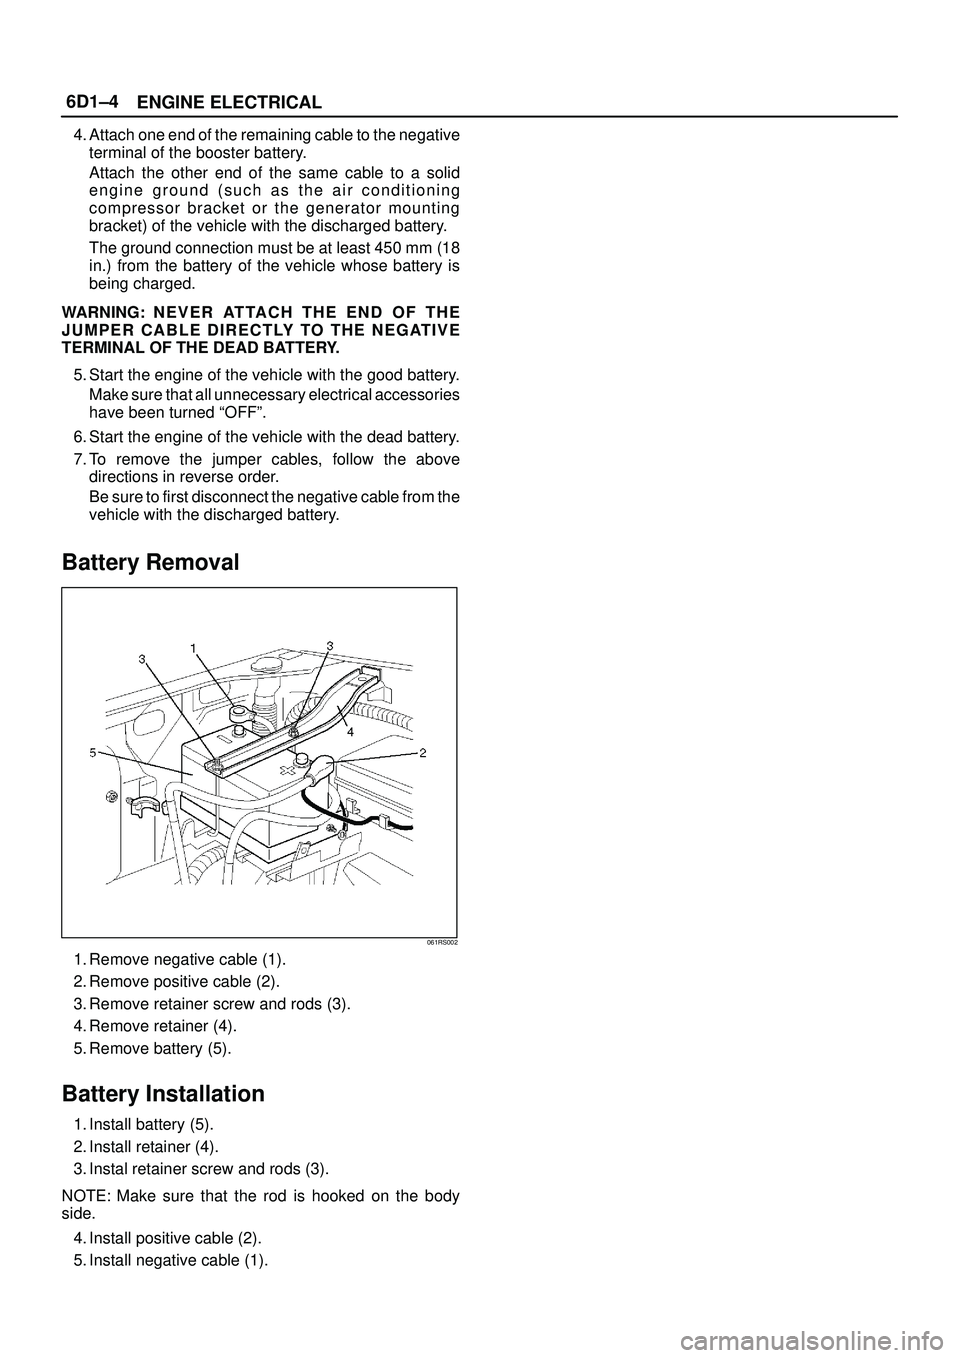 ISUZU TROOPER 1998  Service Repair Manual 6D1±4
ENGINE ELECTRICAL
4. Attach one end of the remaining cable to the negative
terminal of the booster battery.
Attach the other end of the same cable to a solid
engine ground (such as the air cond